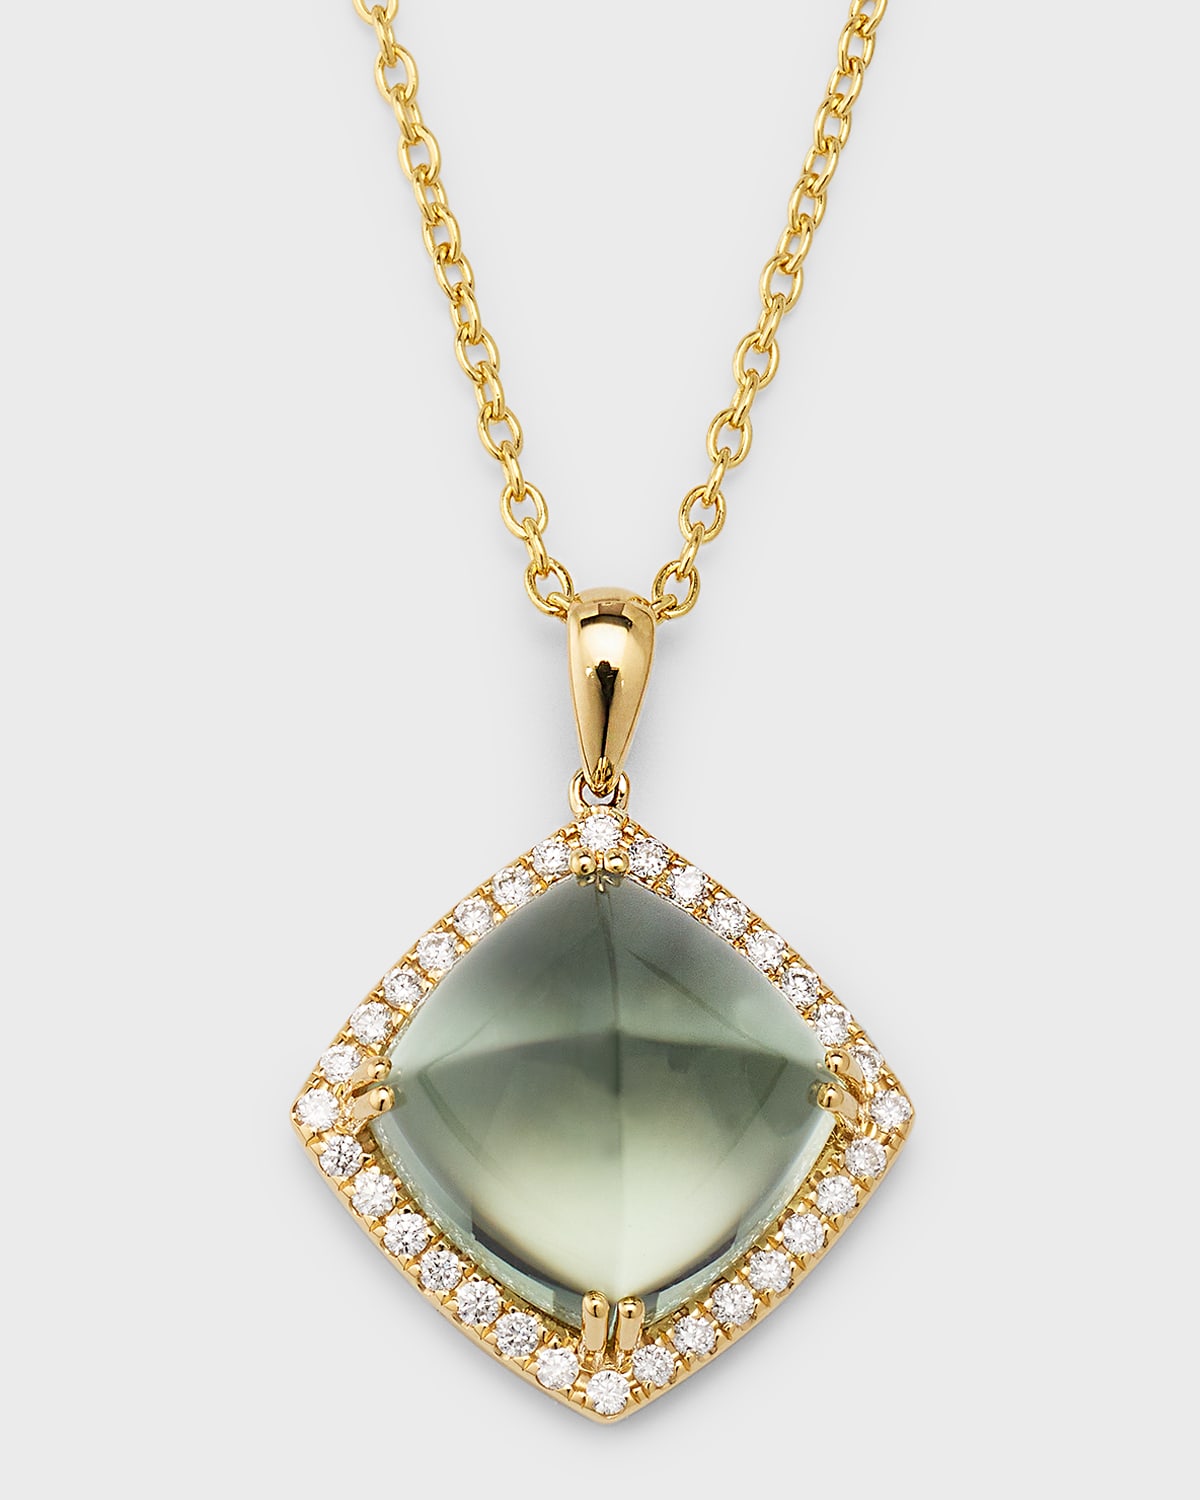 18K Yellow Gold Pendant with Green Amethyst and Diamonds, 8.6tcw